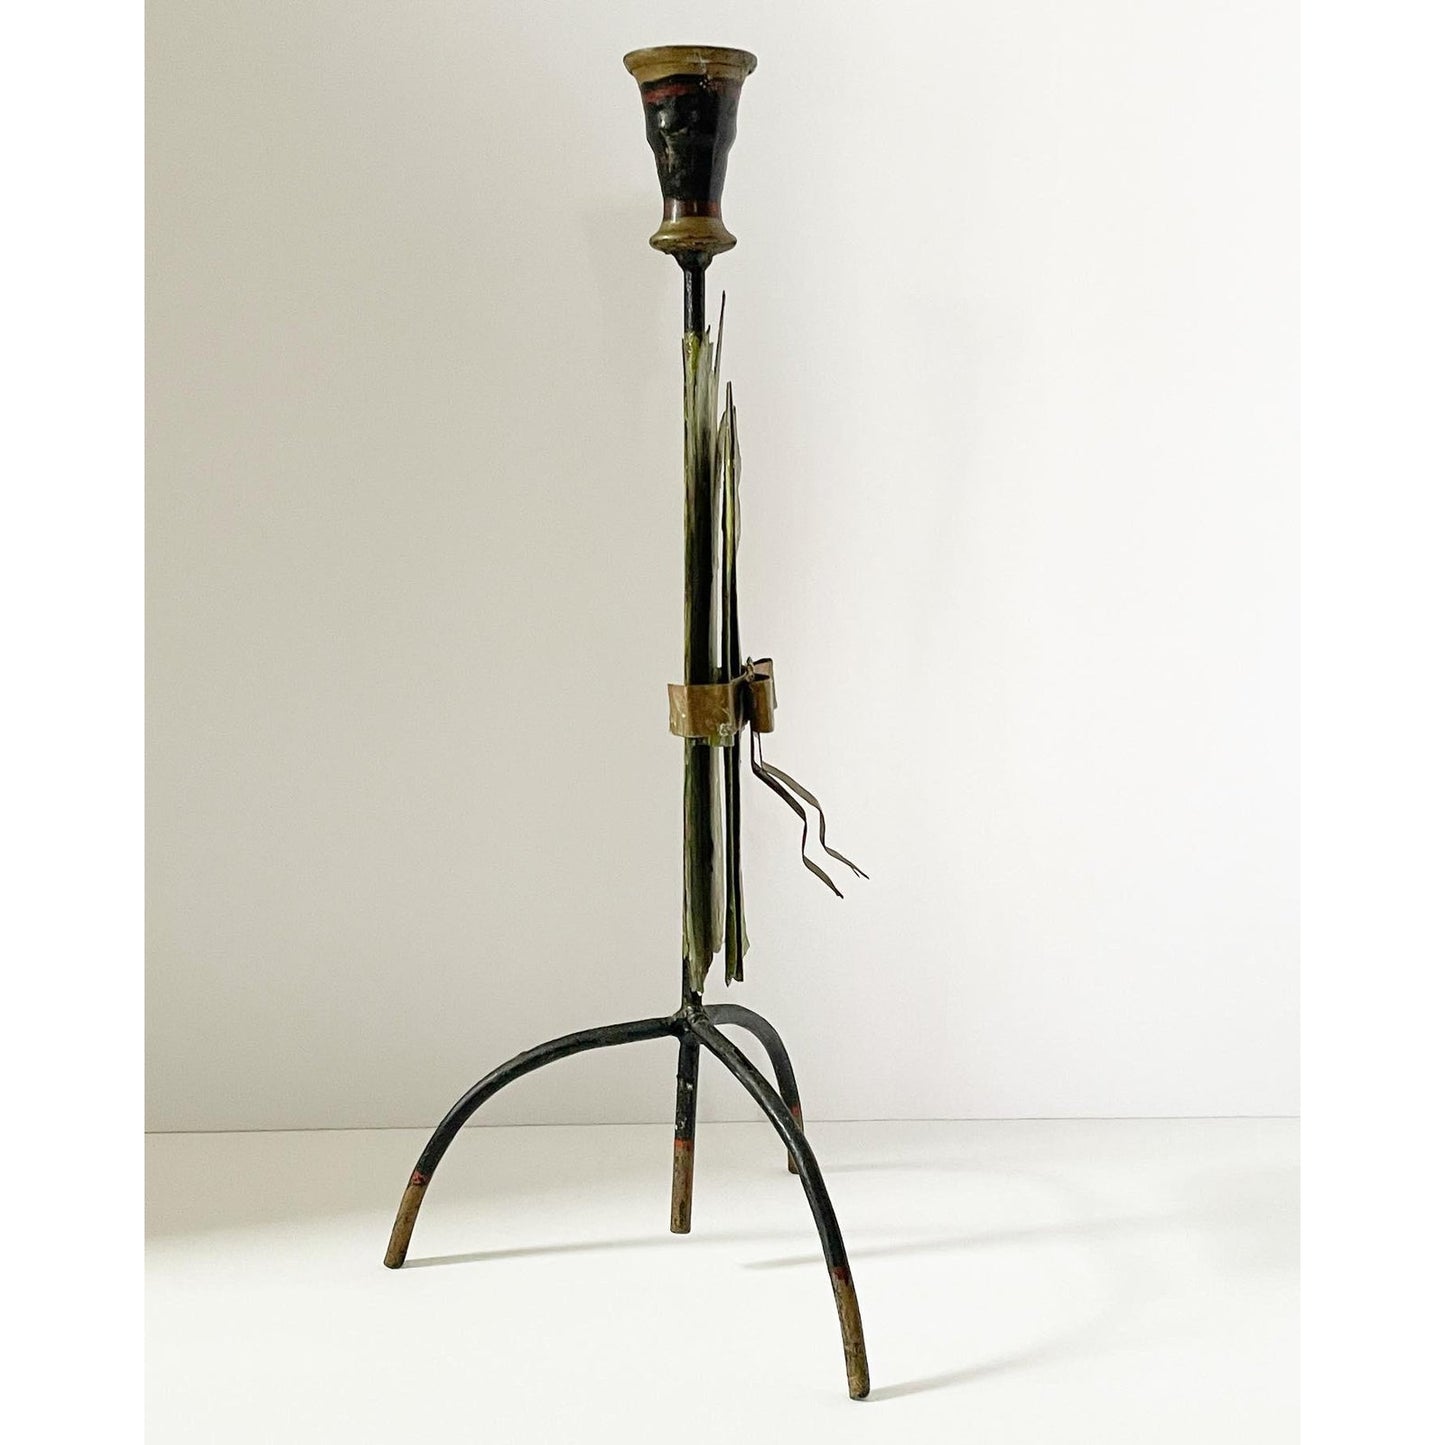 Early 20th Century Handpainted Toleware Candle Stick Holder With Asparagus